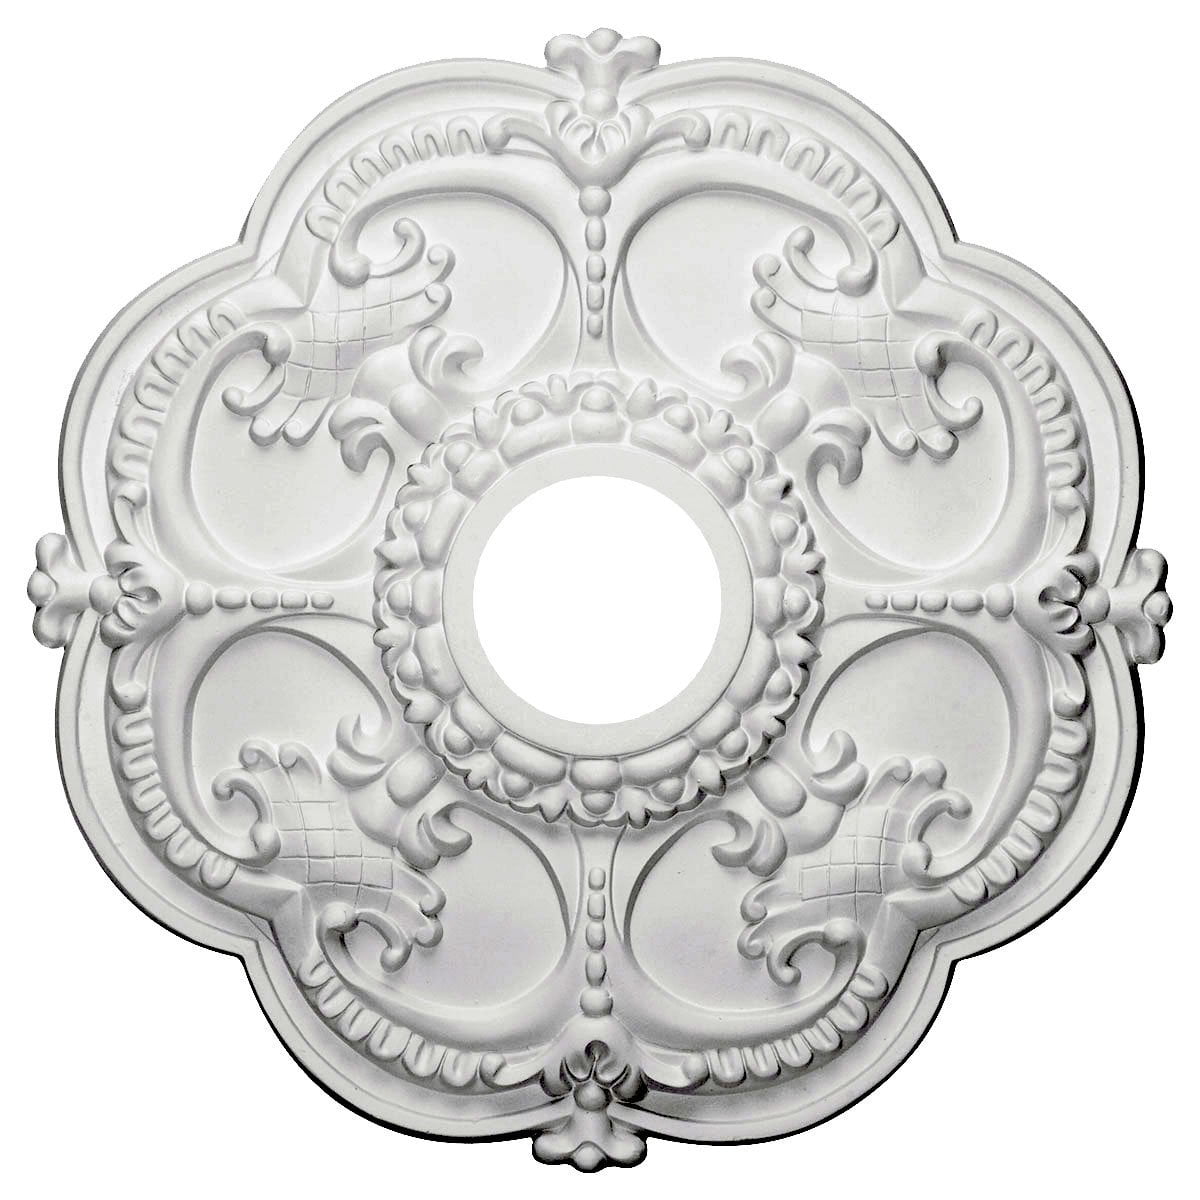 Cm17ro 18 Inch Od X 3 1 2 Inch Id X 1 1 2 Inch Rotherham Ceiling Medallion Modeled After Original Historical Patterns And Designs By Ekena Millwork